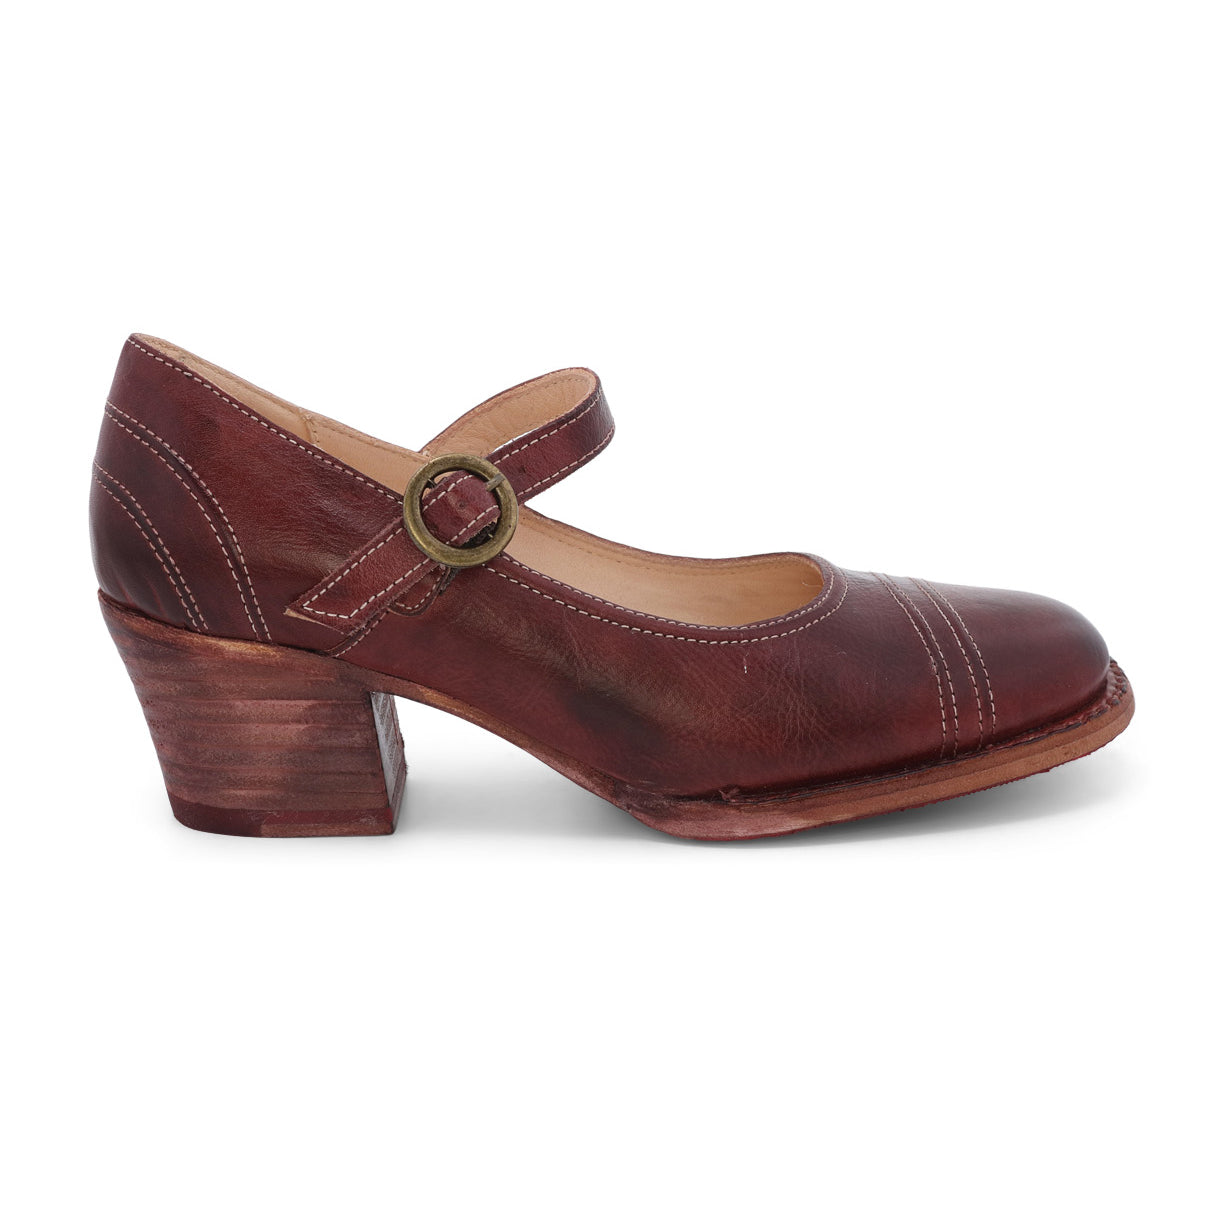 The Oak Tree Farms Twigley is a stylish women's mary jane shoe in burgundy with a wooden heel. This leather shoe combines the classic Mary Jane style with a touch of modern sophistication.